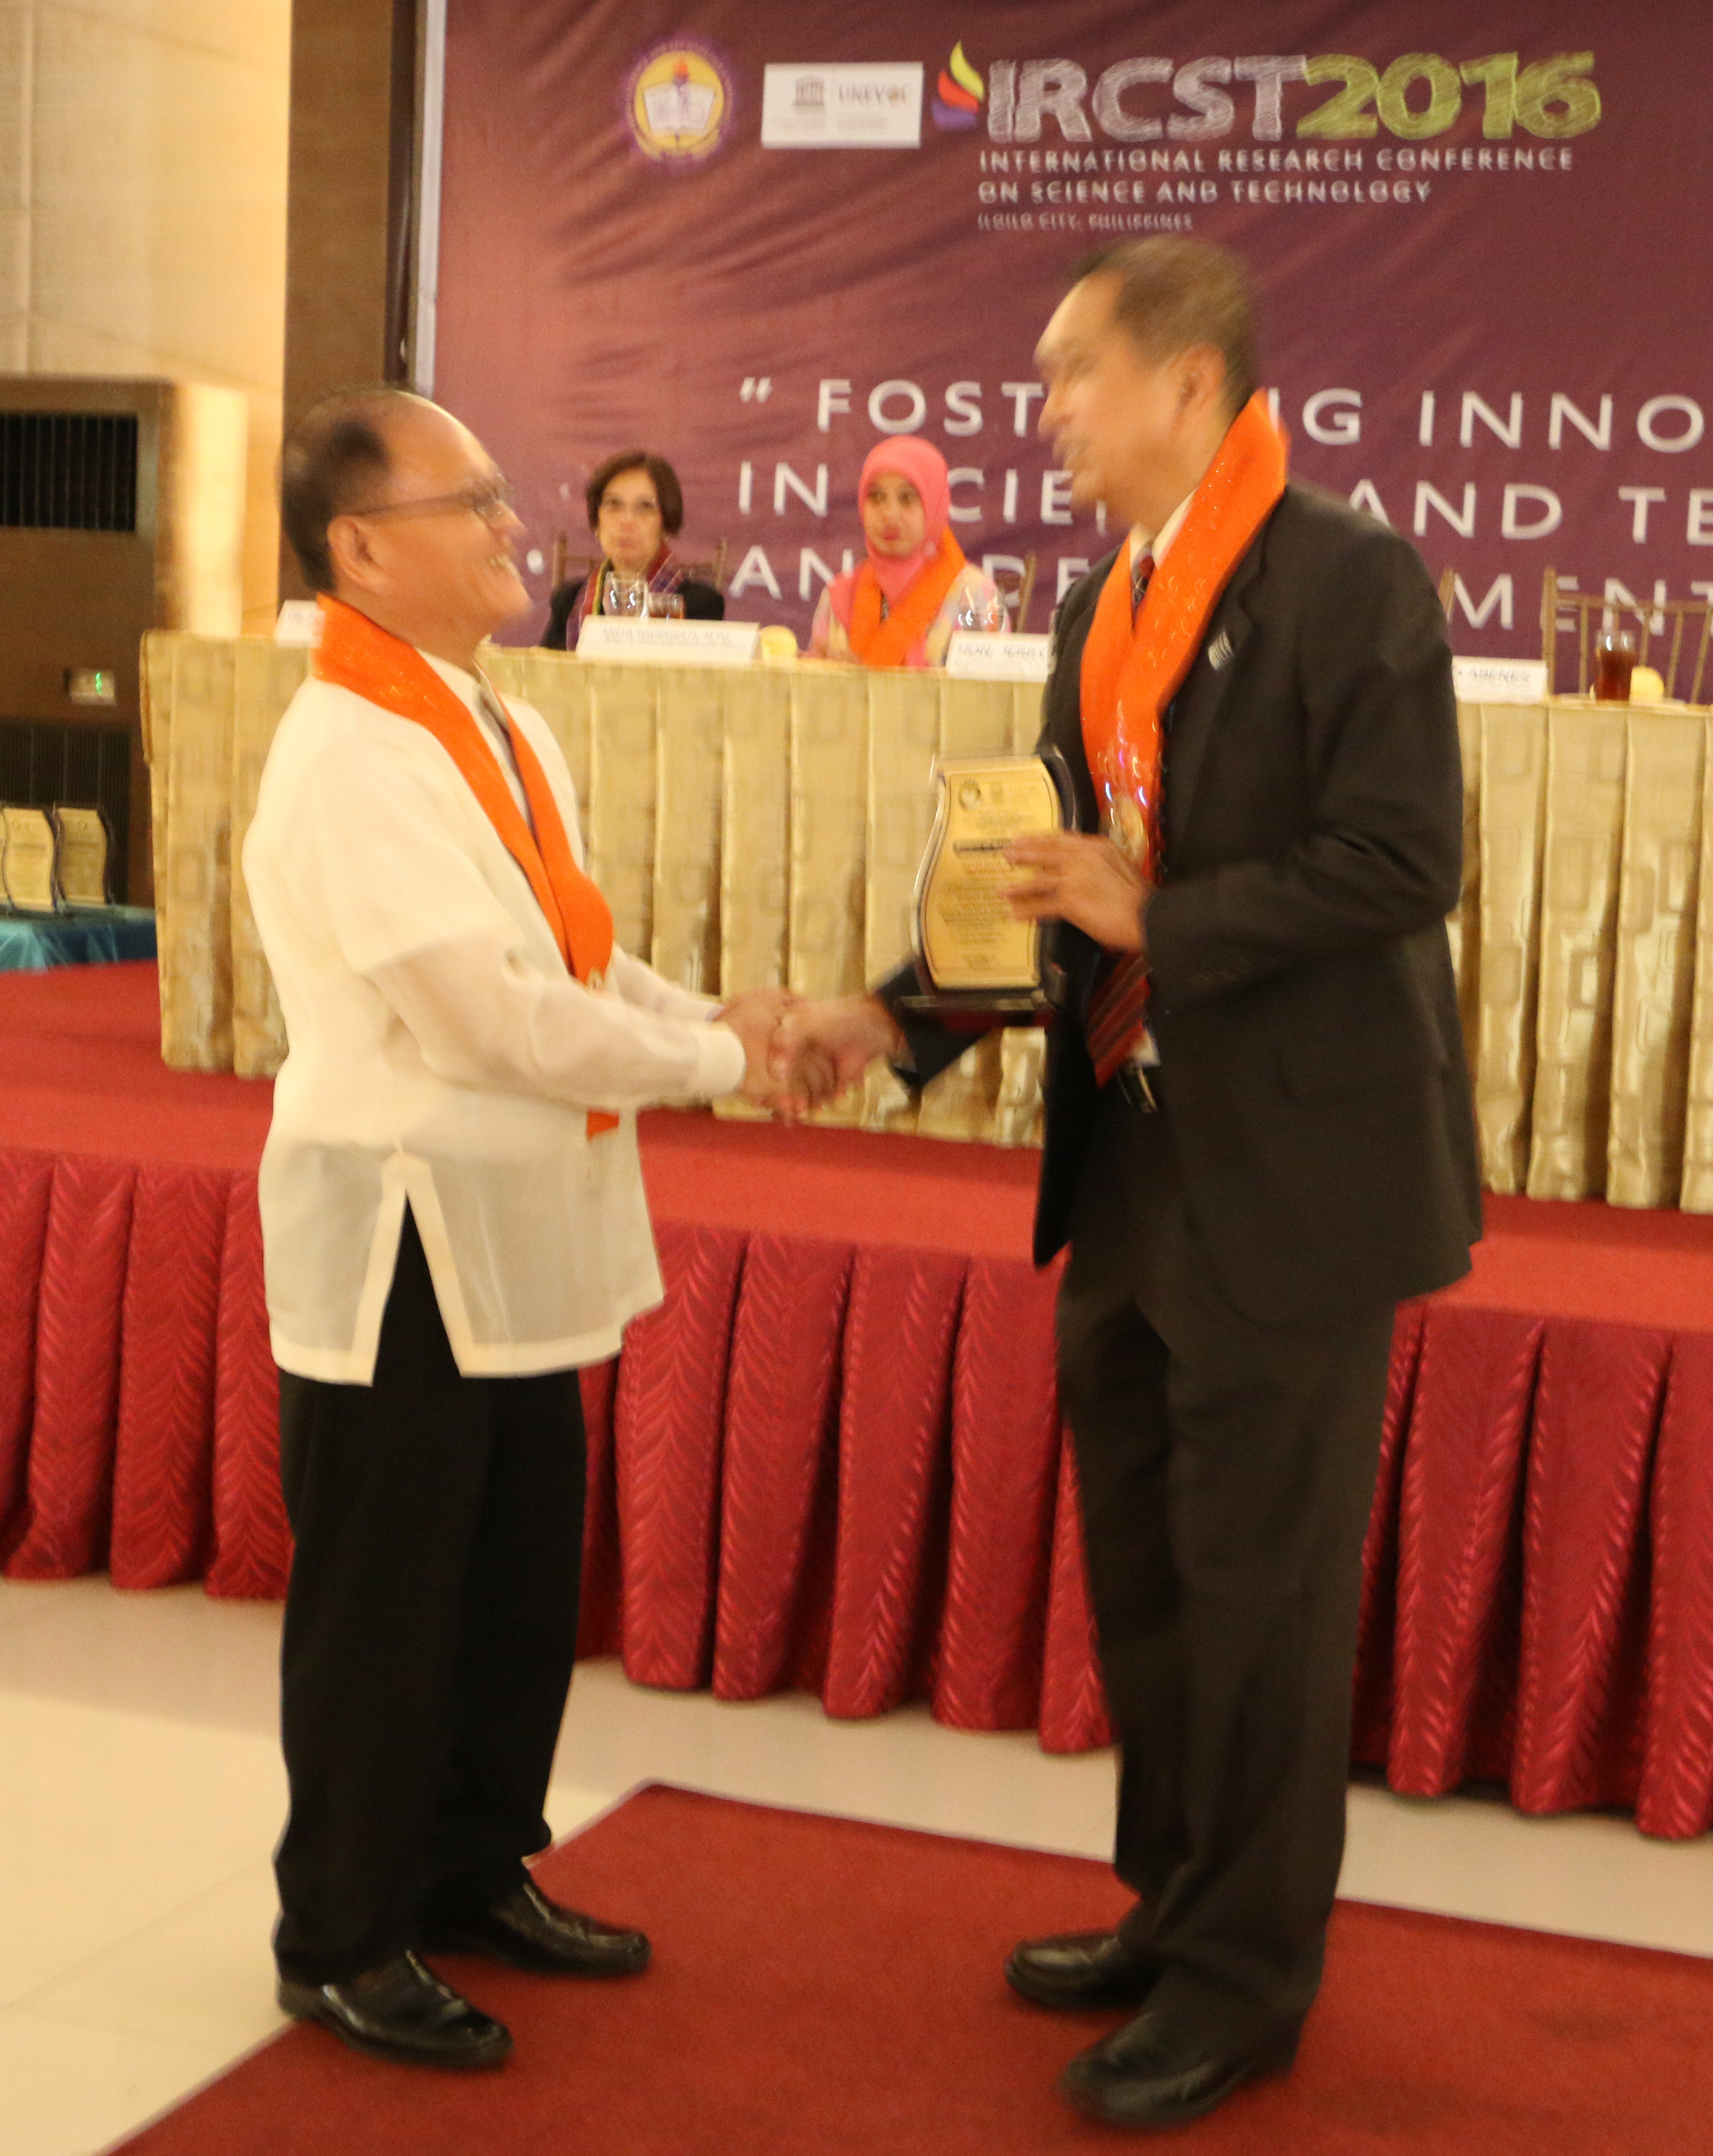 ISAT U President Dr. Raul F. Muyong gives the Plague of Recognition to Dr. Fiorillo B. Abenes of the USAID-STRIDE.